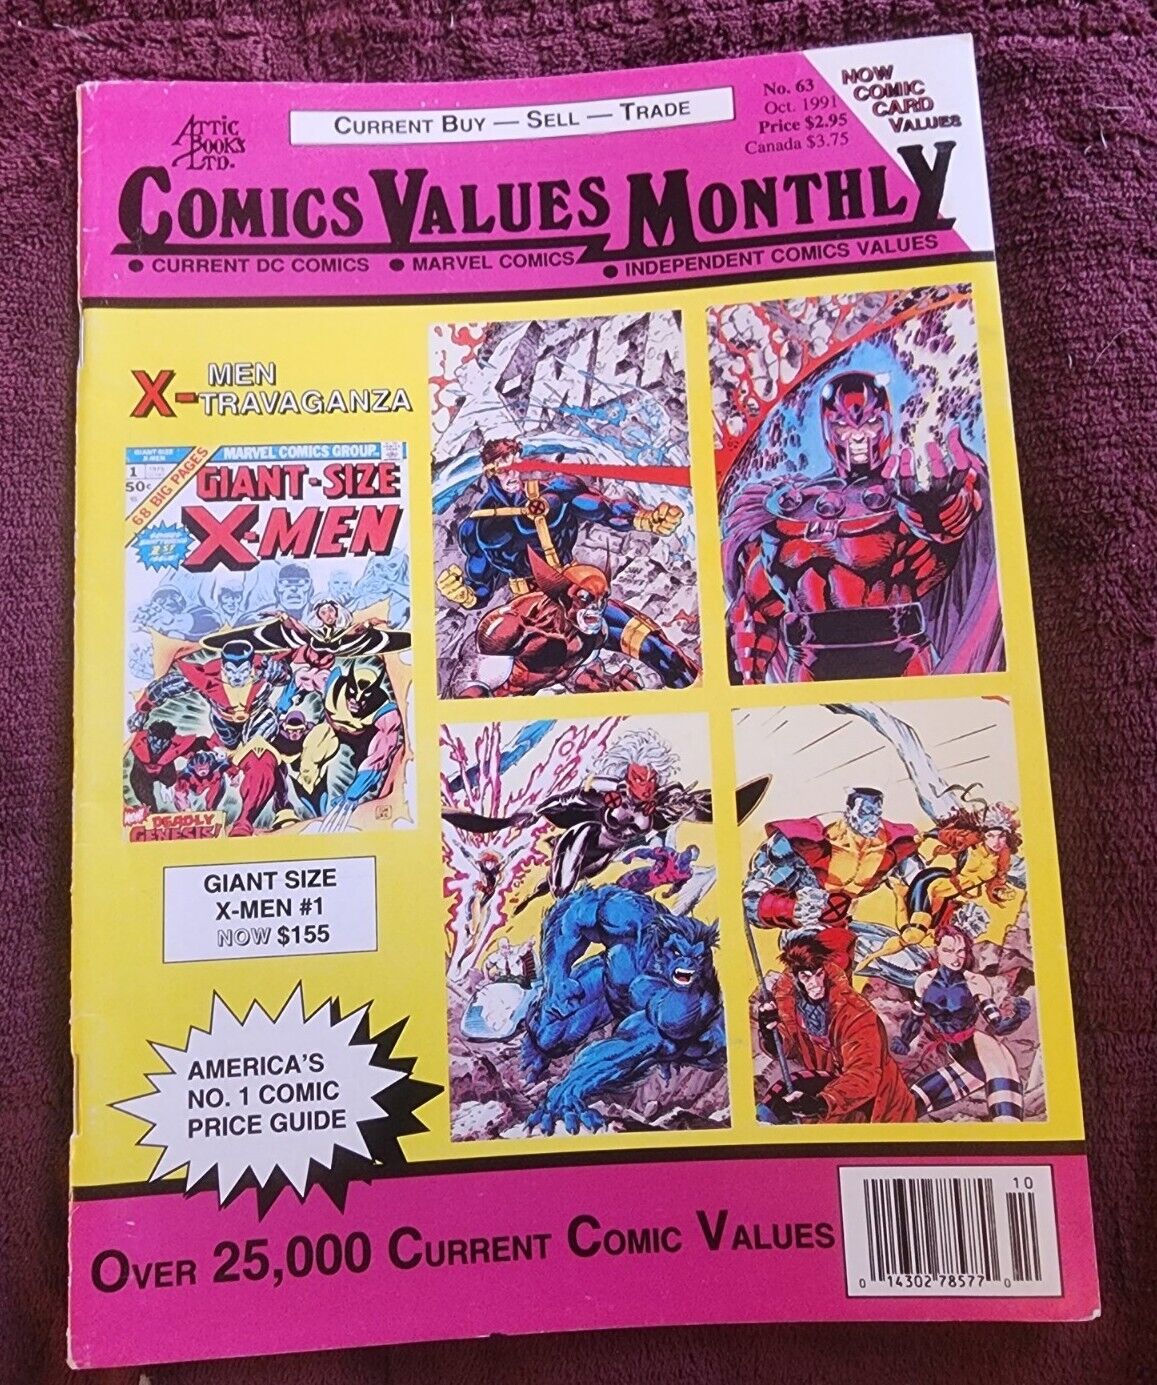 Comic Values Monthly Oct 1991 Attic Books Giant Size X-Men #1 Feature B29:1126